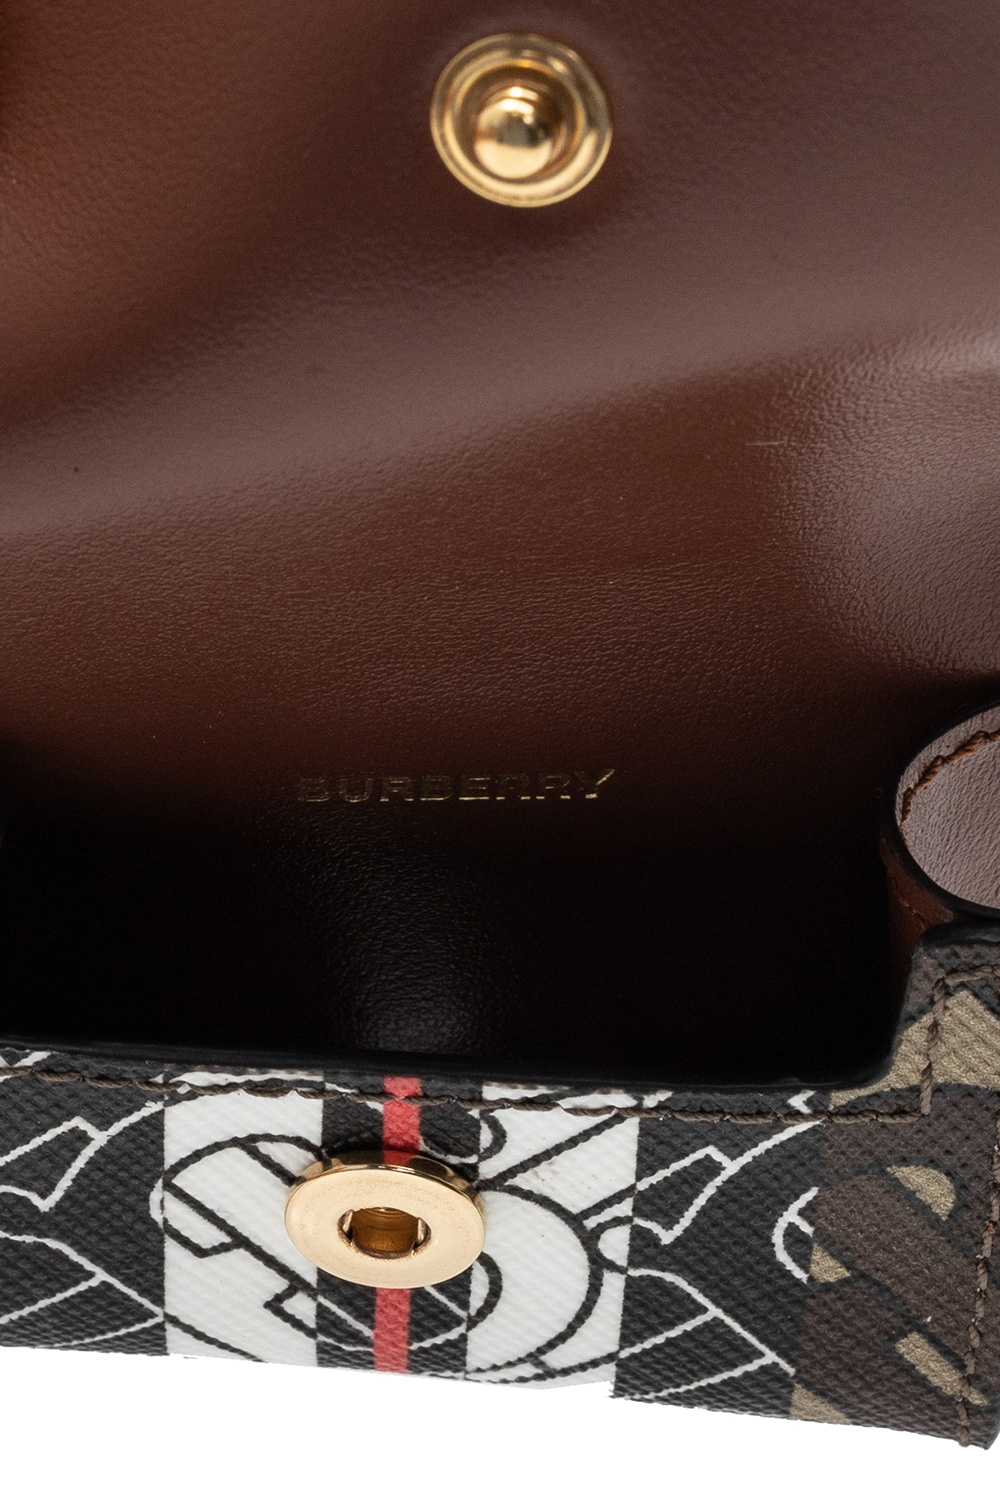 burberry tra AirPods case